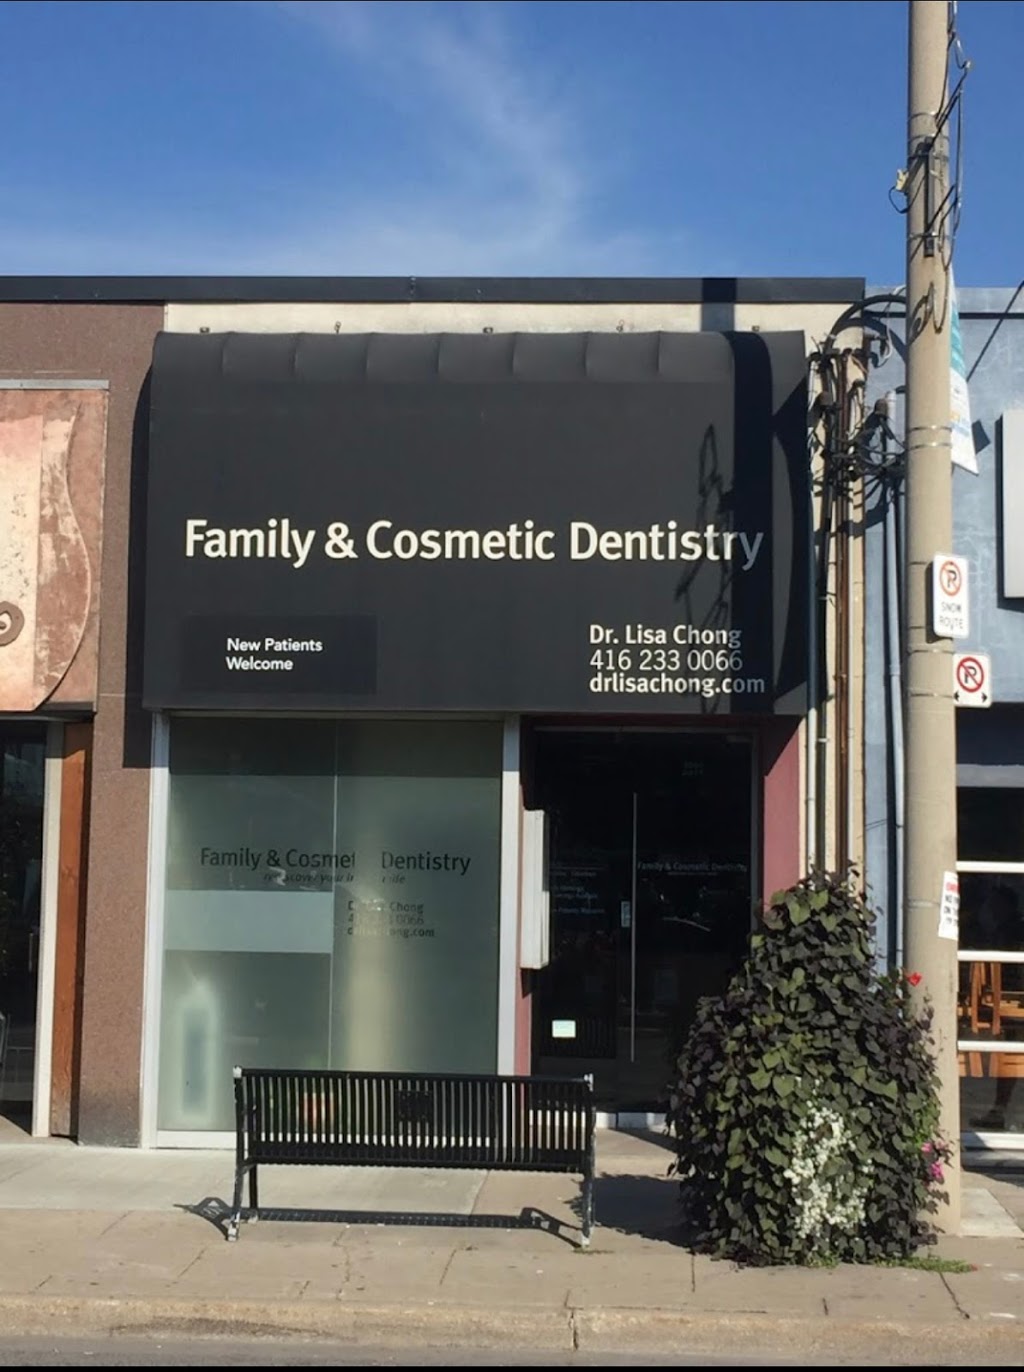 Family & Cosmetic Dentistry Dr.Lisa Chong | dentist | 3006 Bloor St W, Etobicoke, ON M8X 1C2, Canada | 4162330066 OR +1 416-233-0066